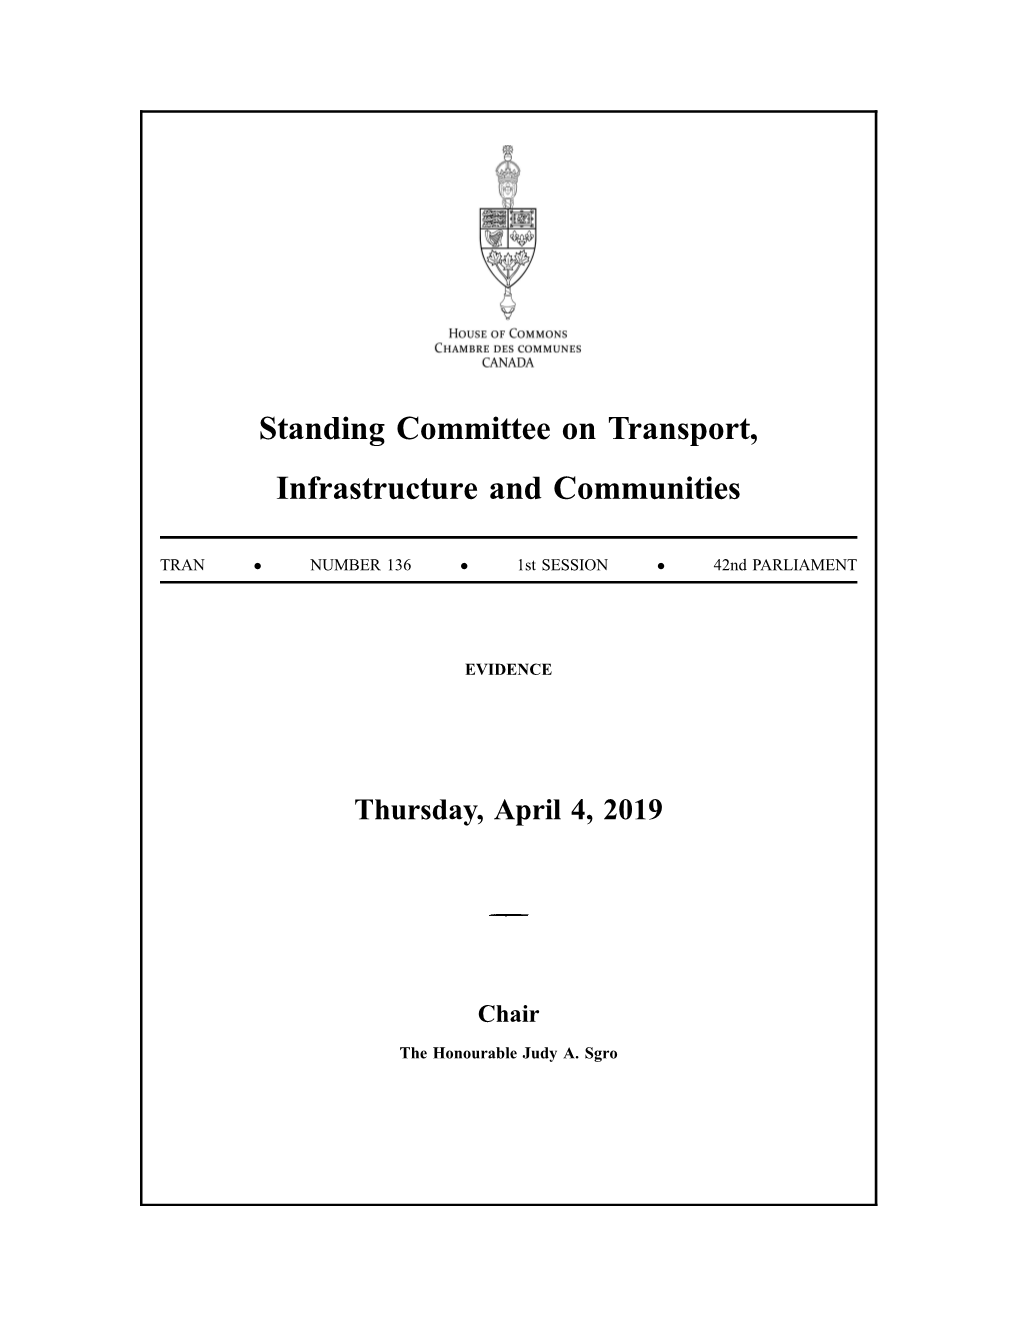 Standing Committee on Transport, Infrastructure and Communities